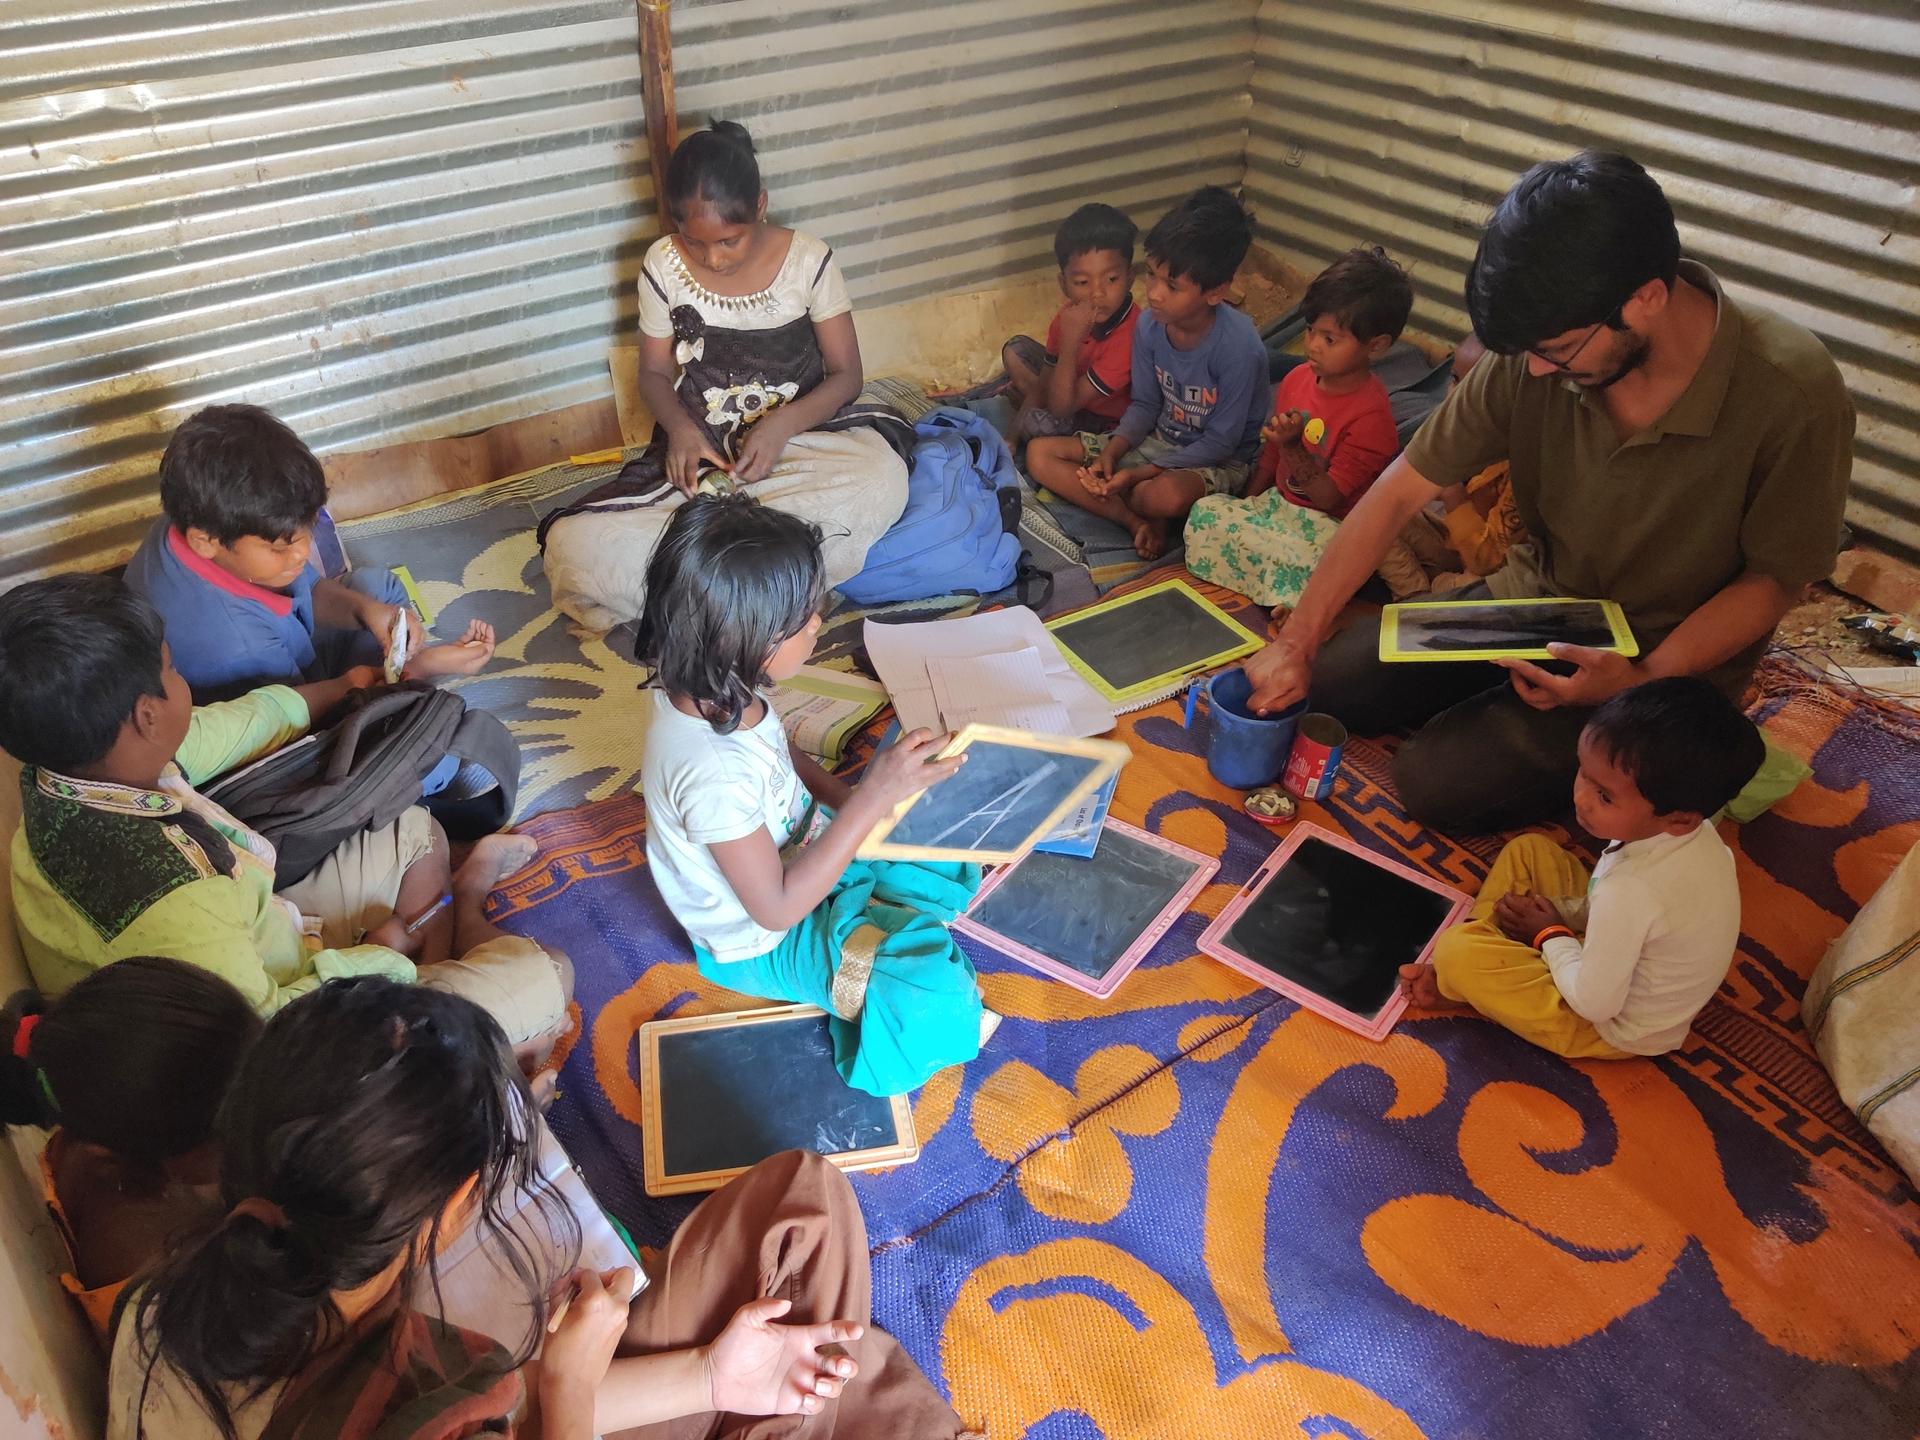 College students volunteer to teach children at an informal school in Bangalore, India.